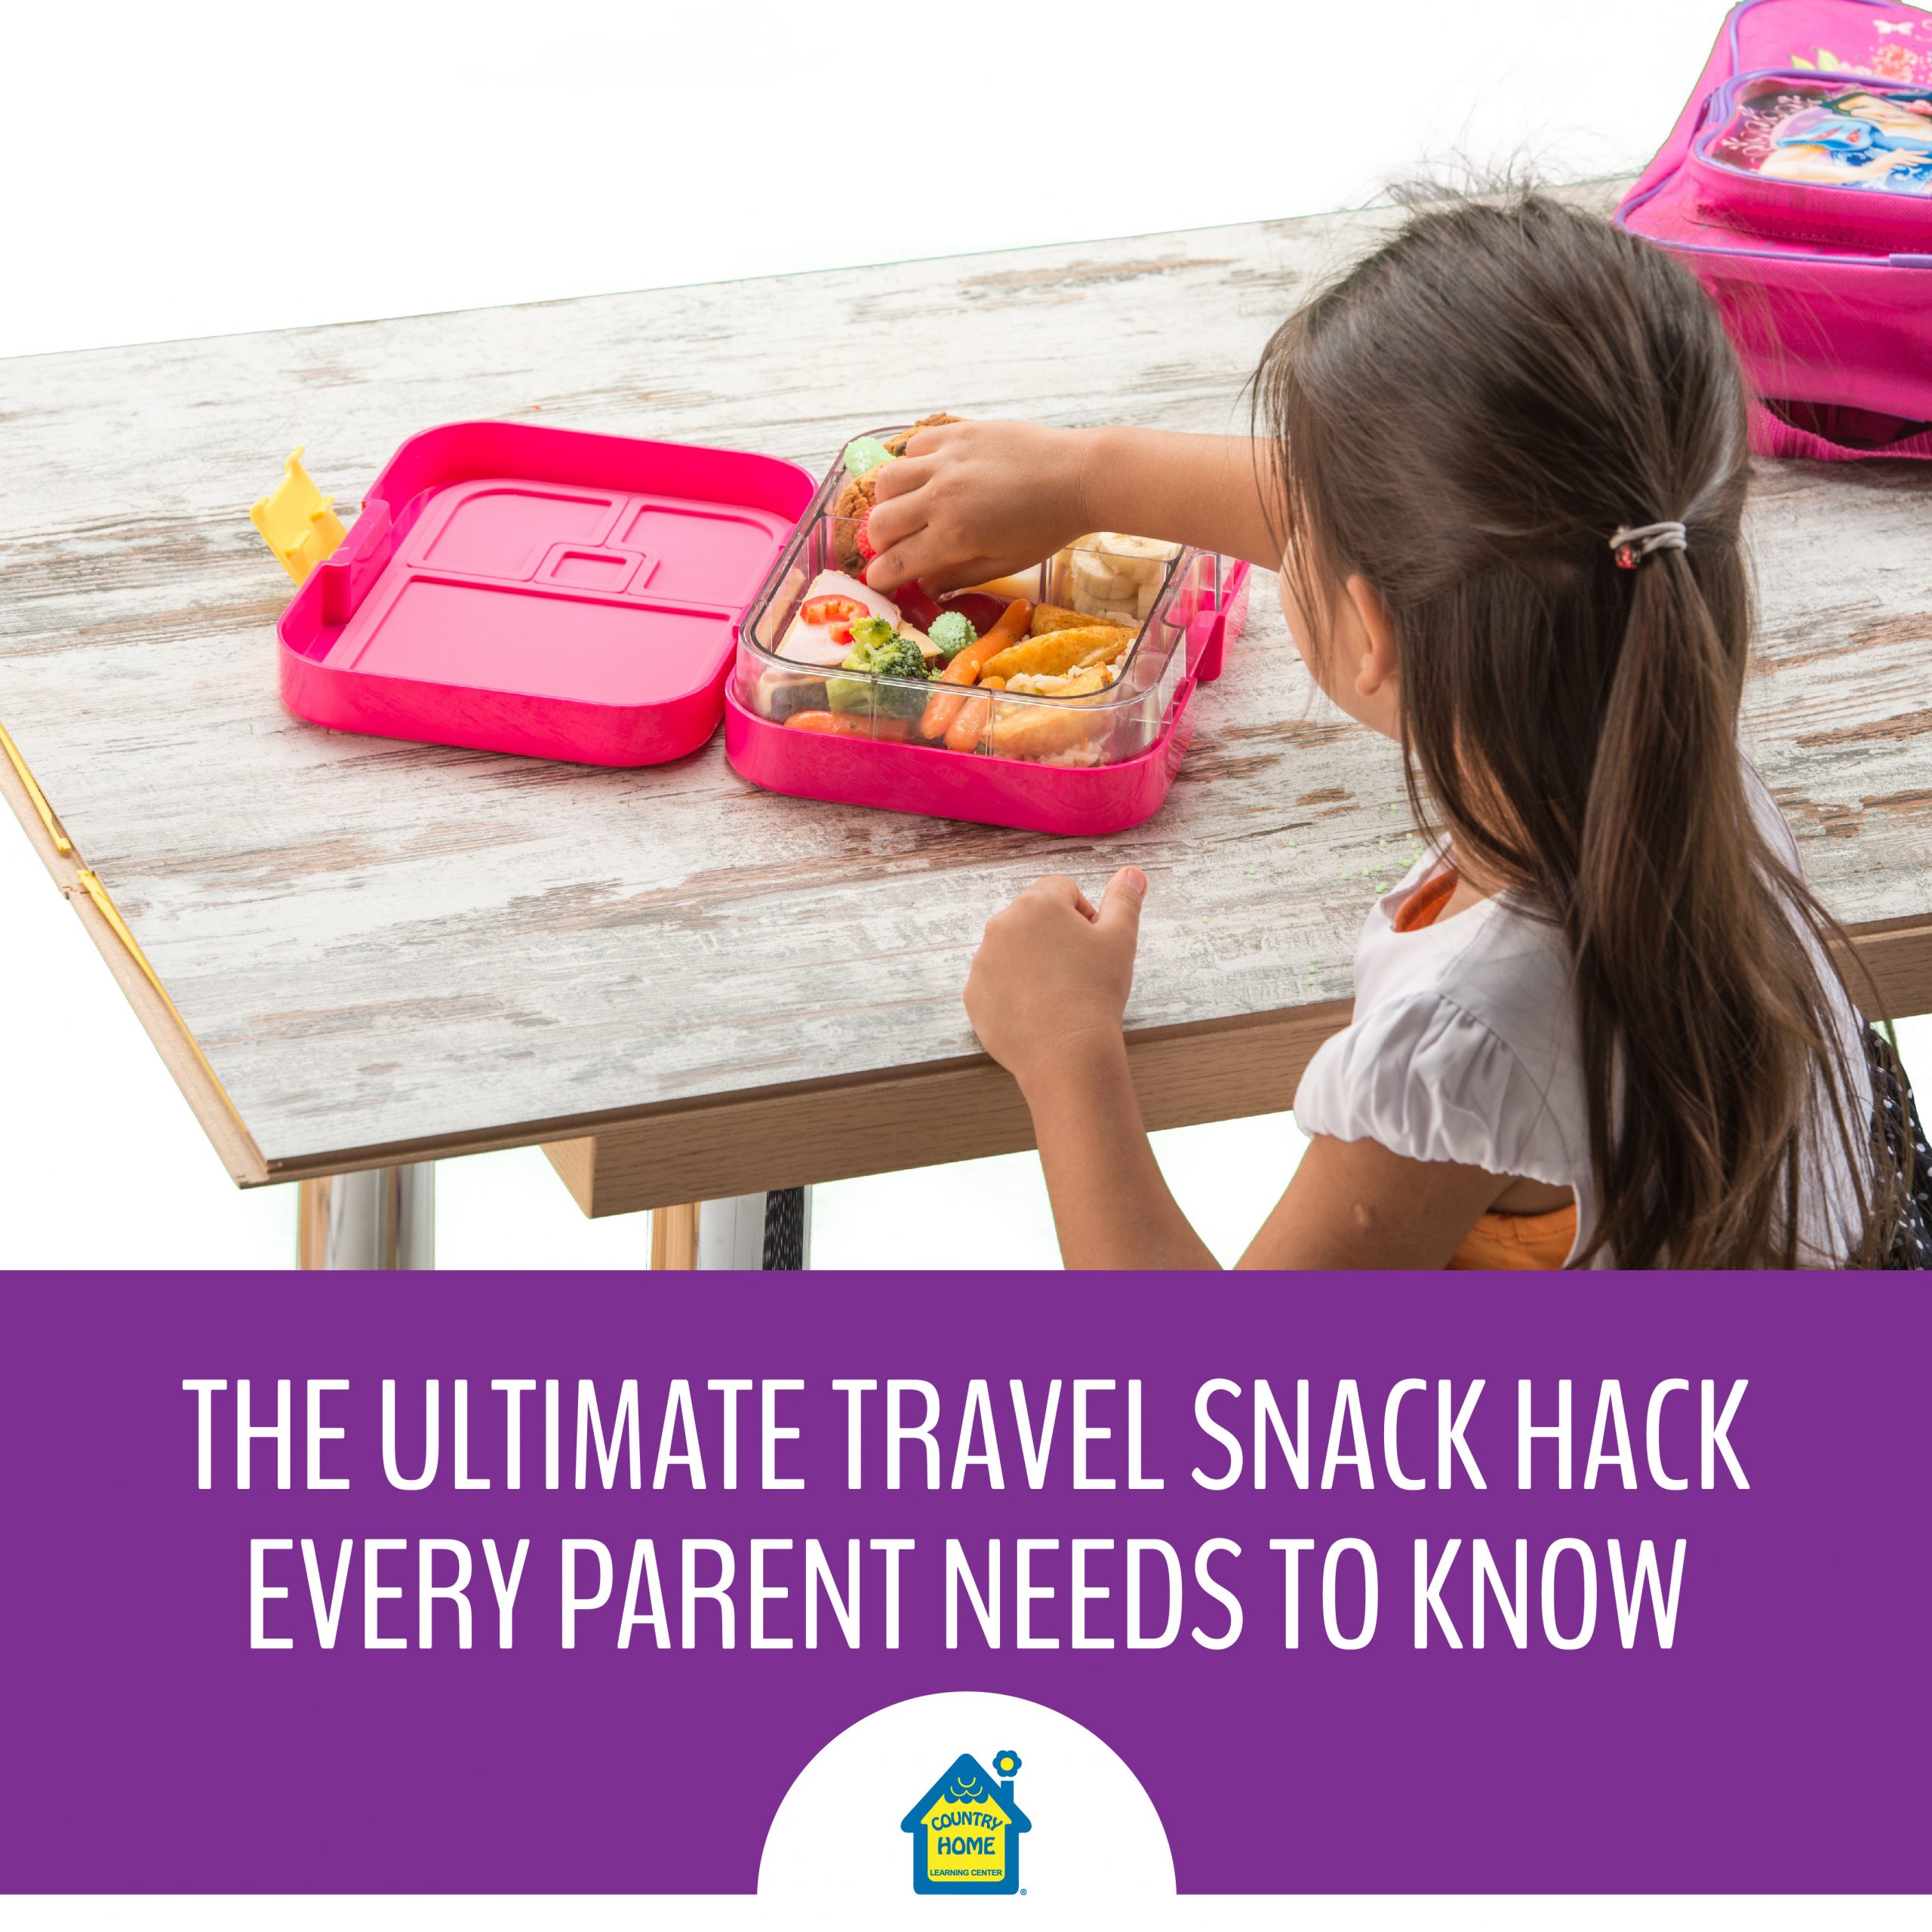 The Ultimate Travel Snack Hack for Parents